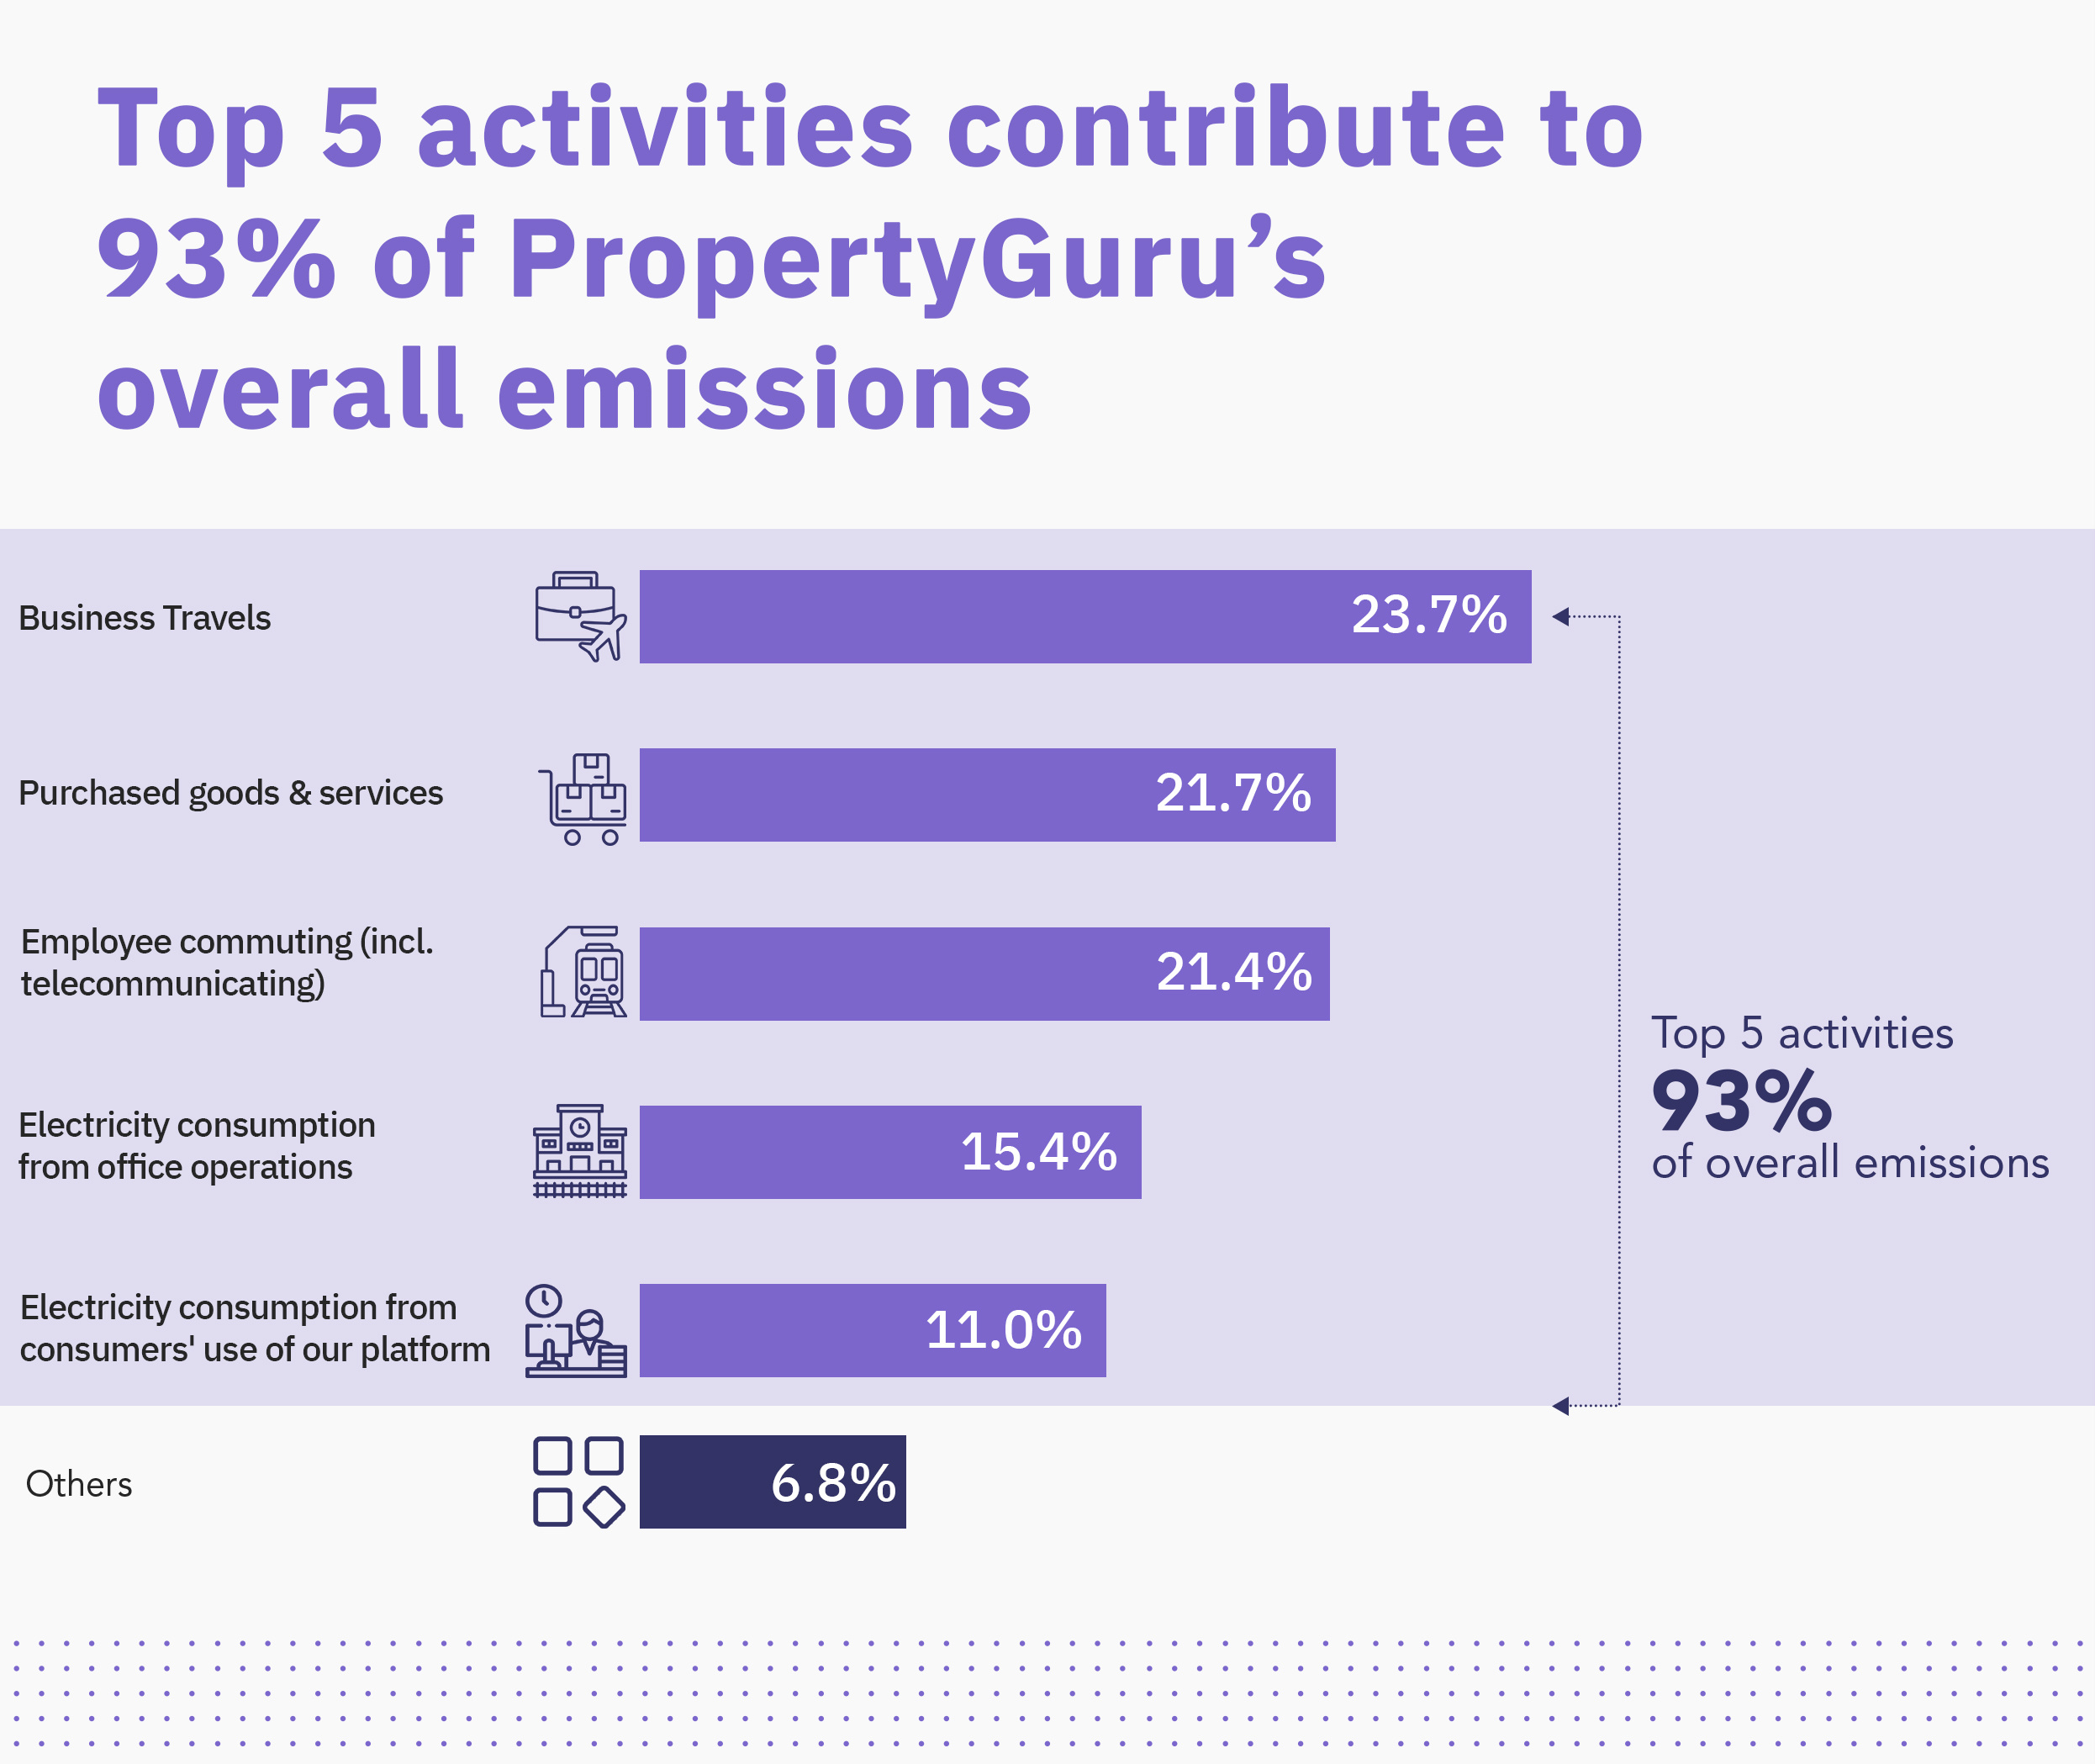 top-5-activities-account-for-93-of-overall-emissions